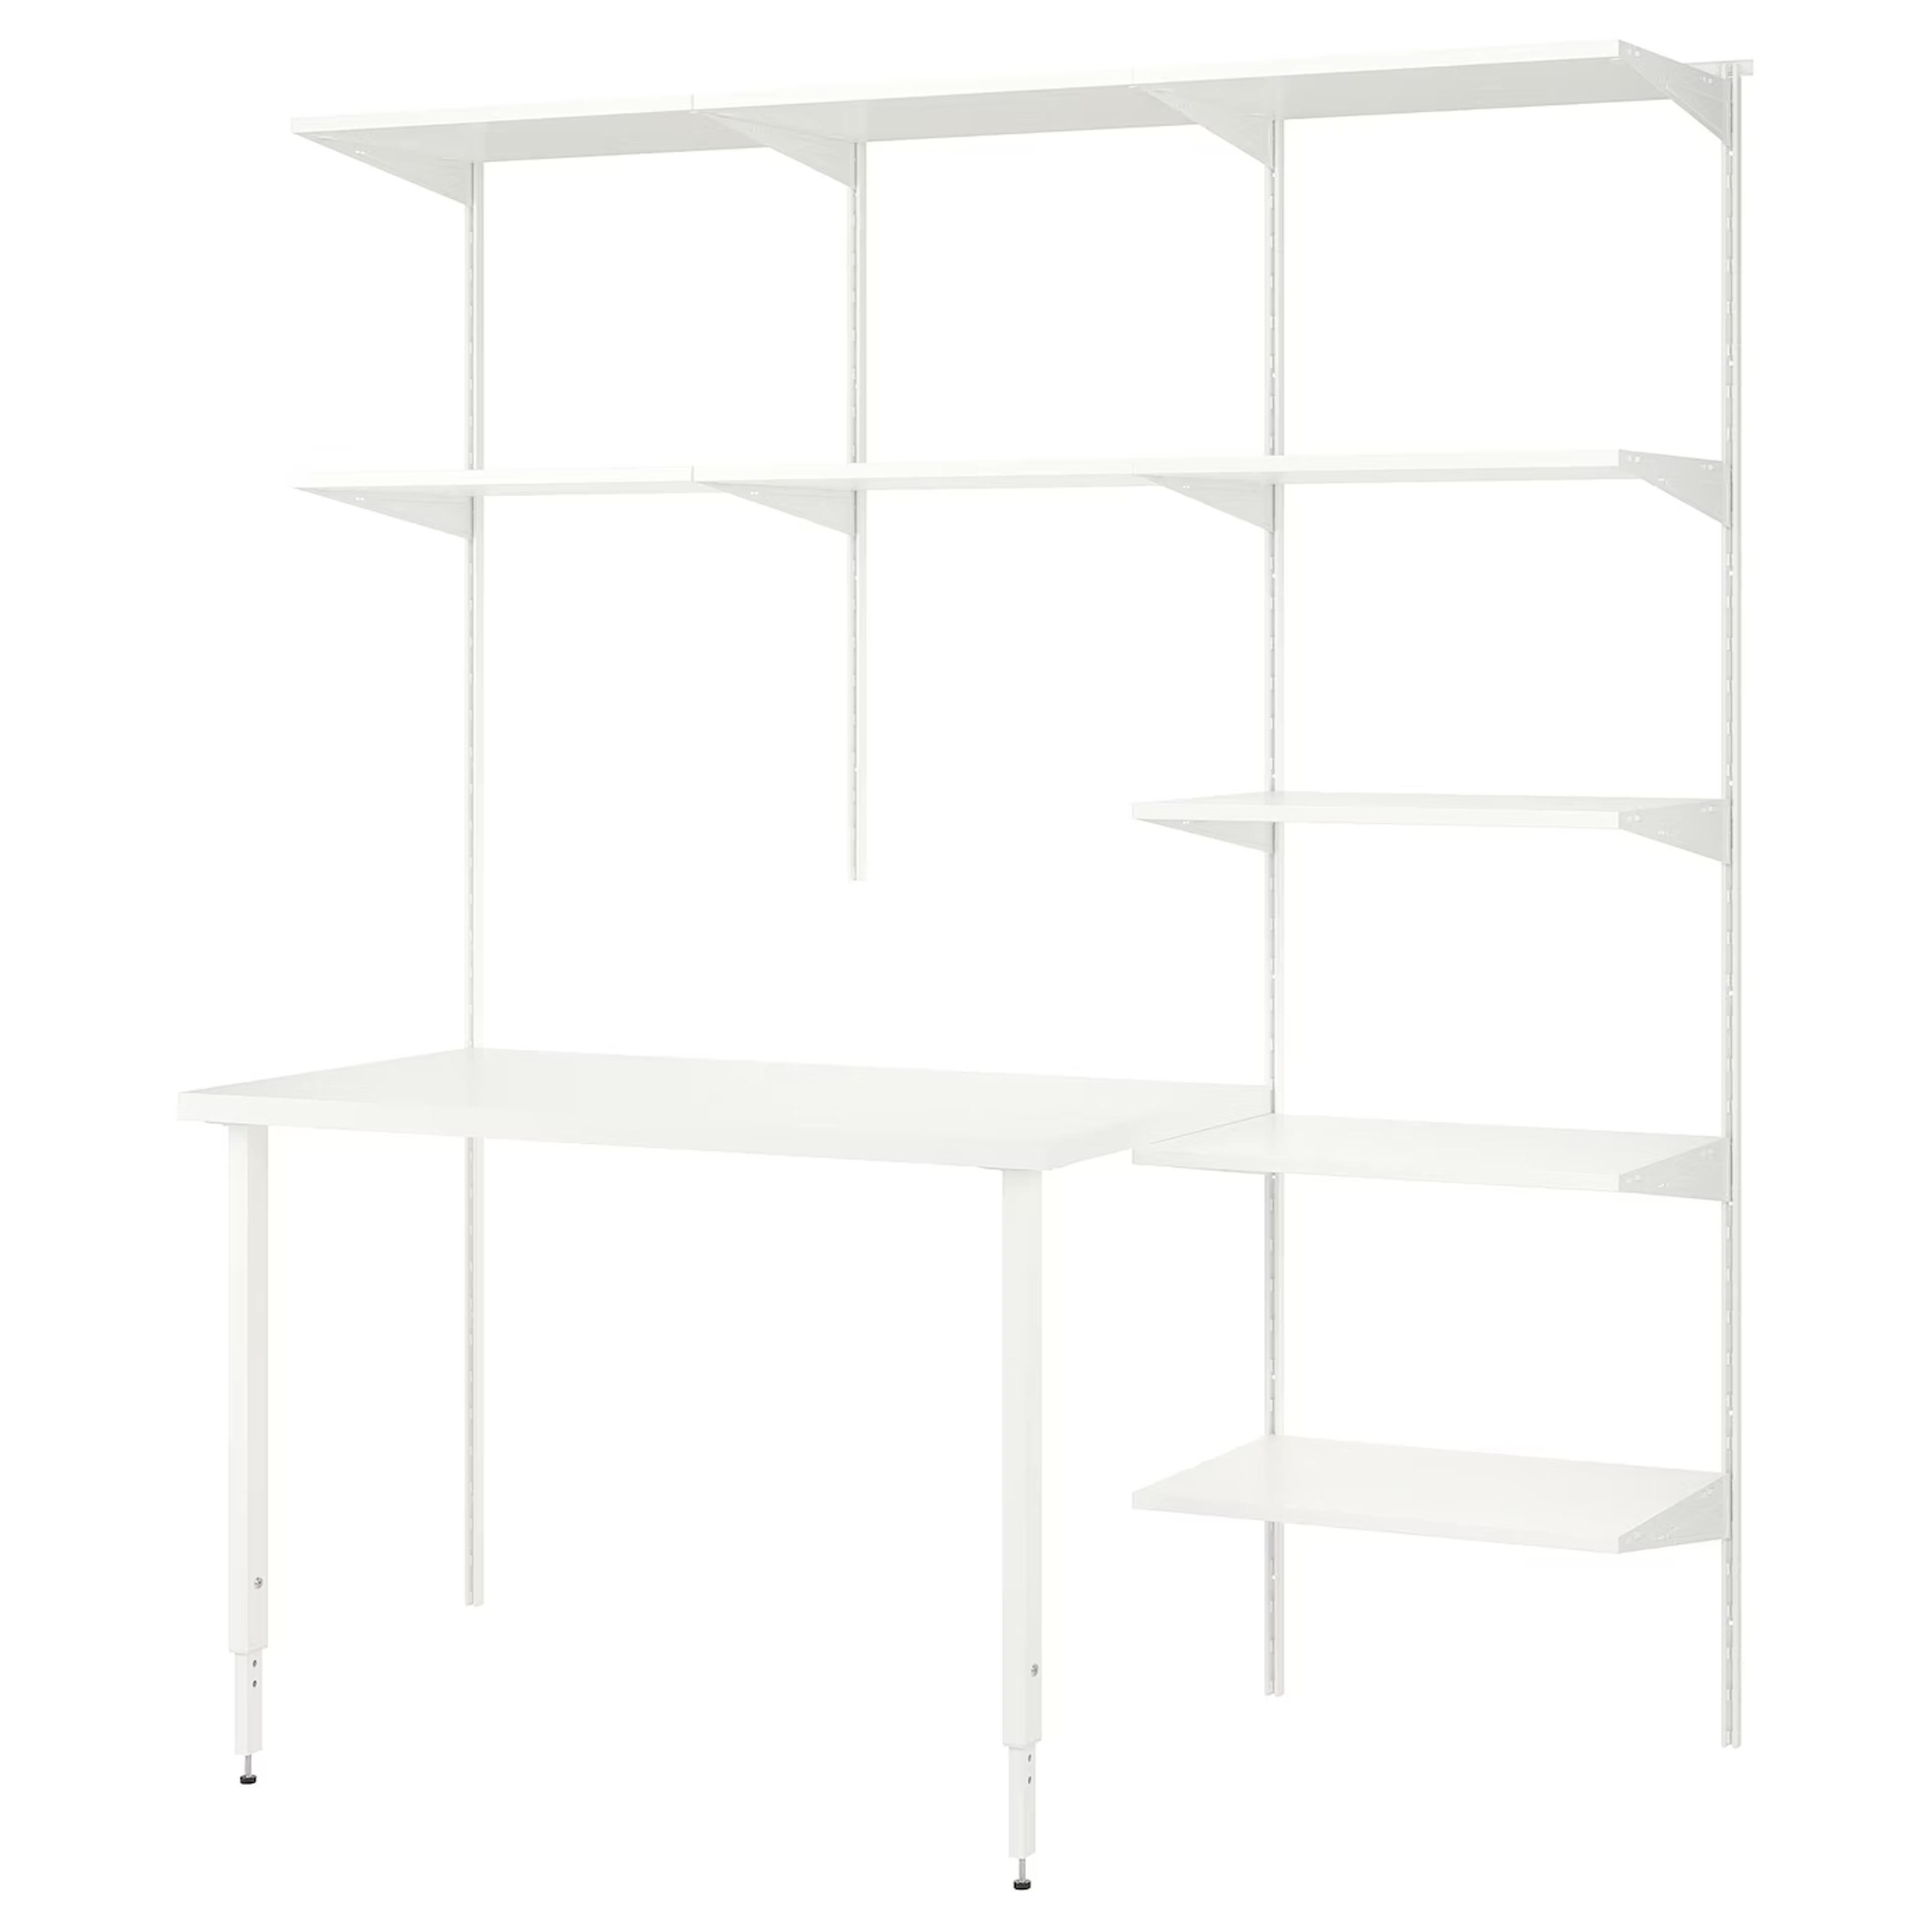 BOAXEL / LAGKAPTEN Shelving unit with table top, white, 735/8x243/8x79"